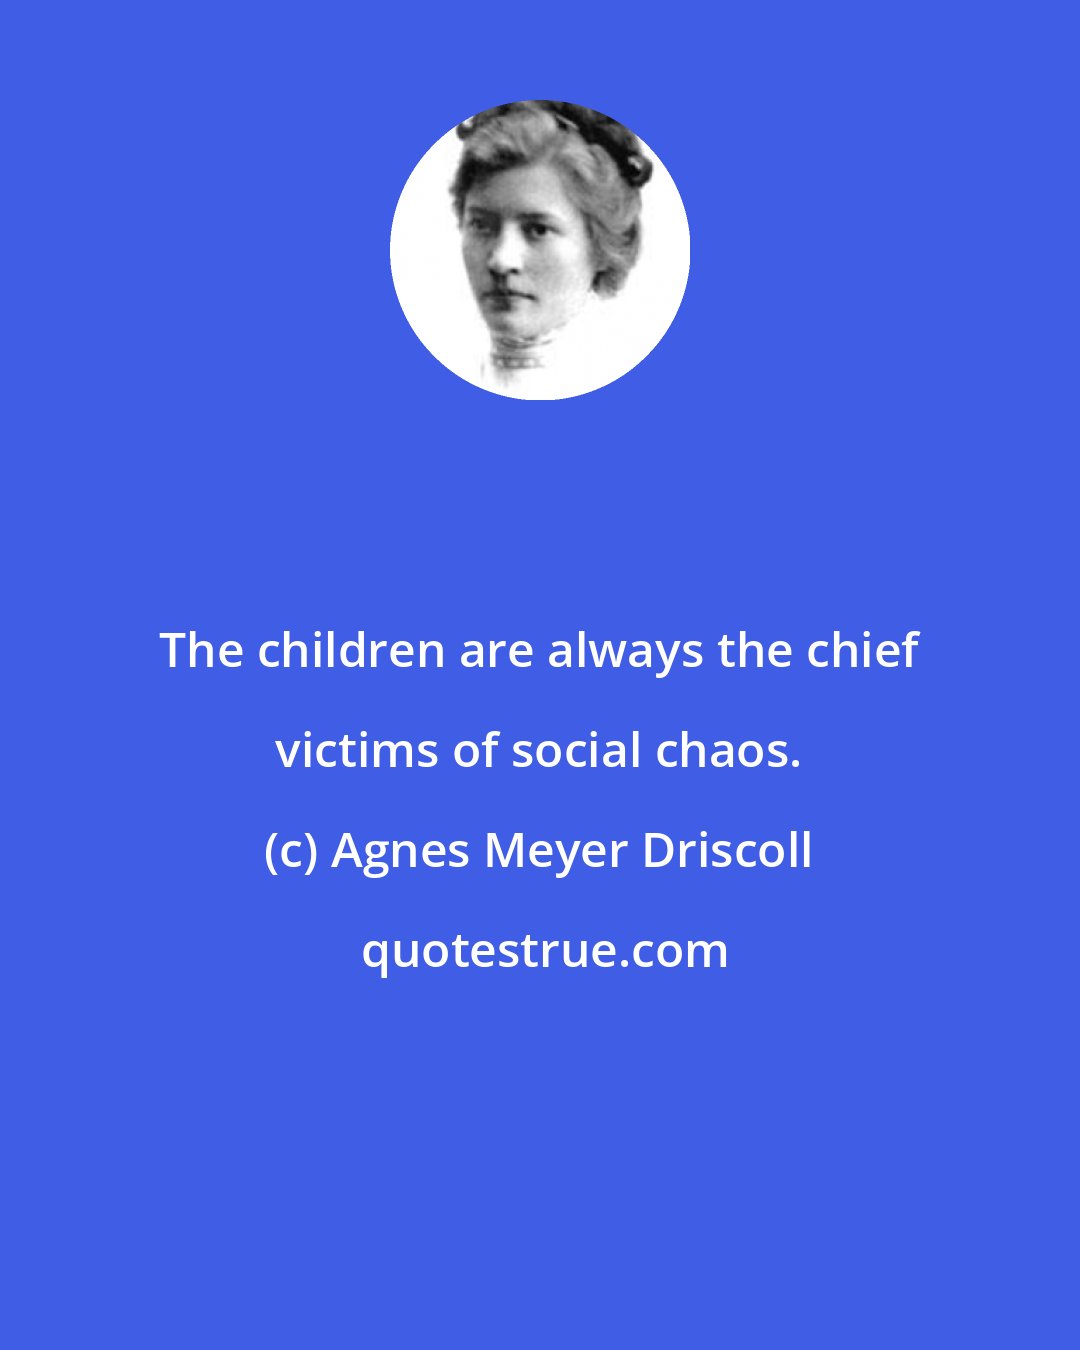 Agnes Meyer Driscoll: The children are always the chief victims of social chaos.